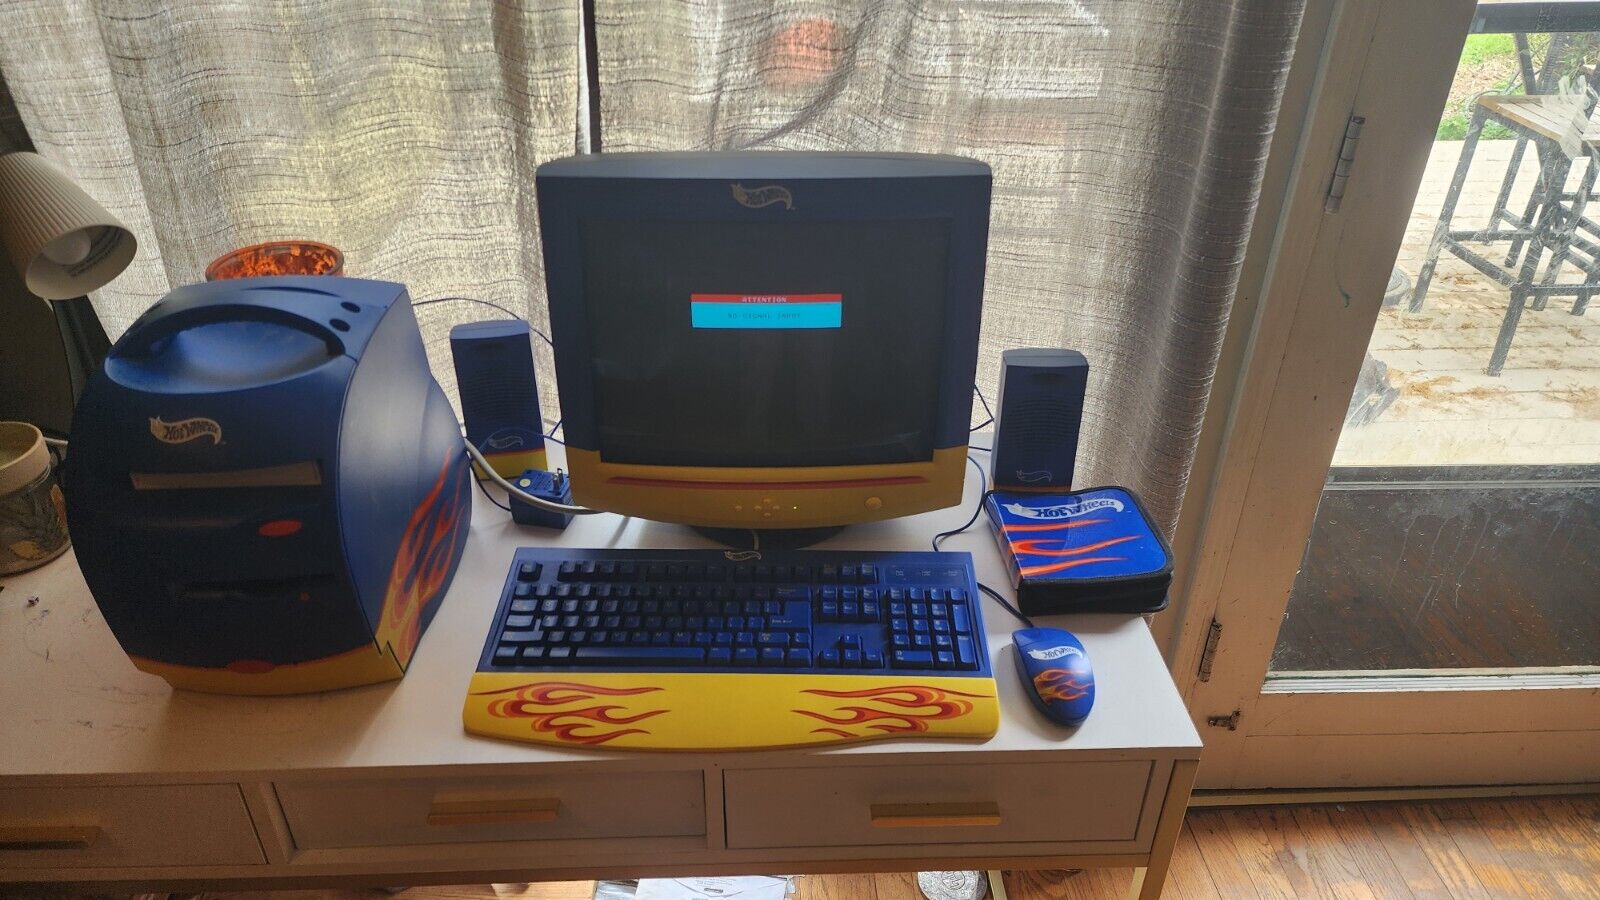 Patriot Hotwheels PC Computer mouse, keyboard, wheel, Mouse, speakers, games